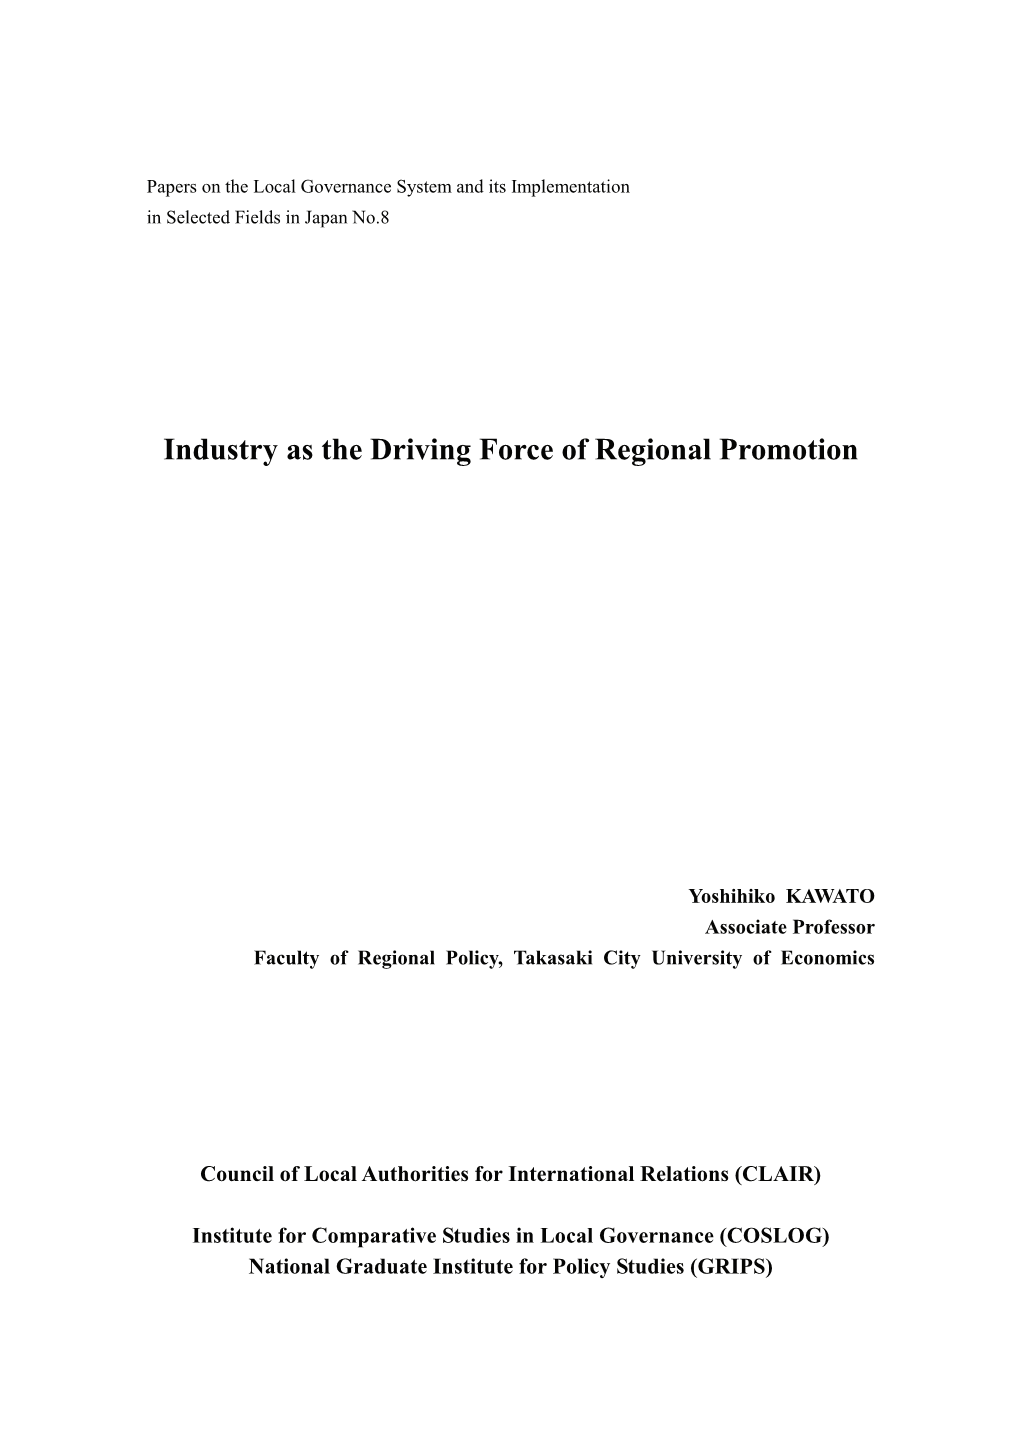 Industry As the Driving Force of Regional Promotion